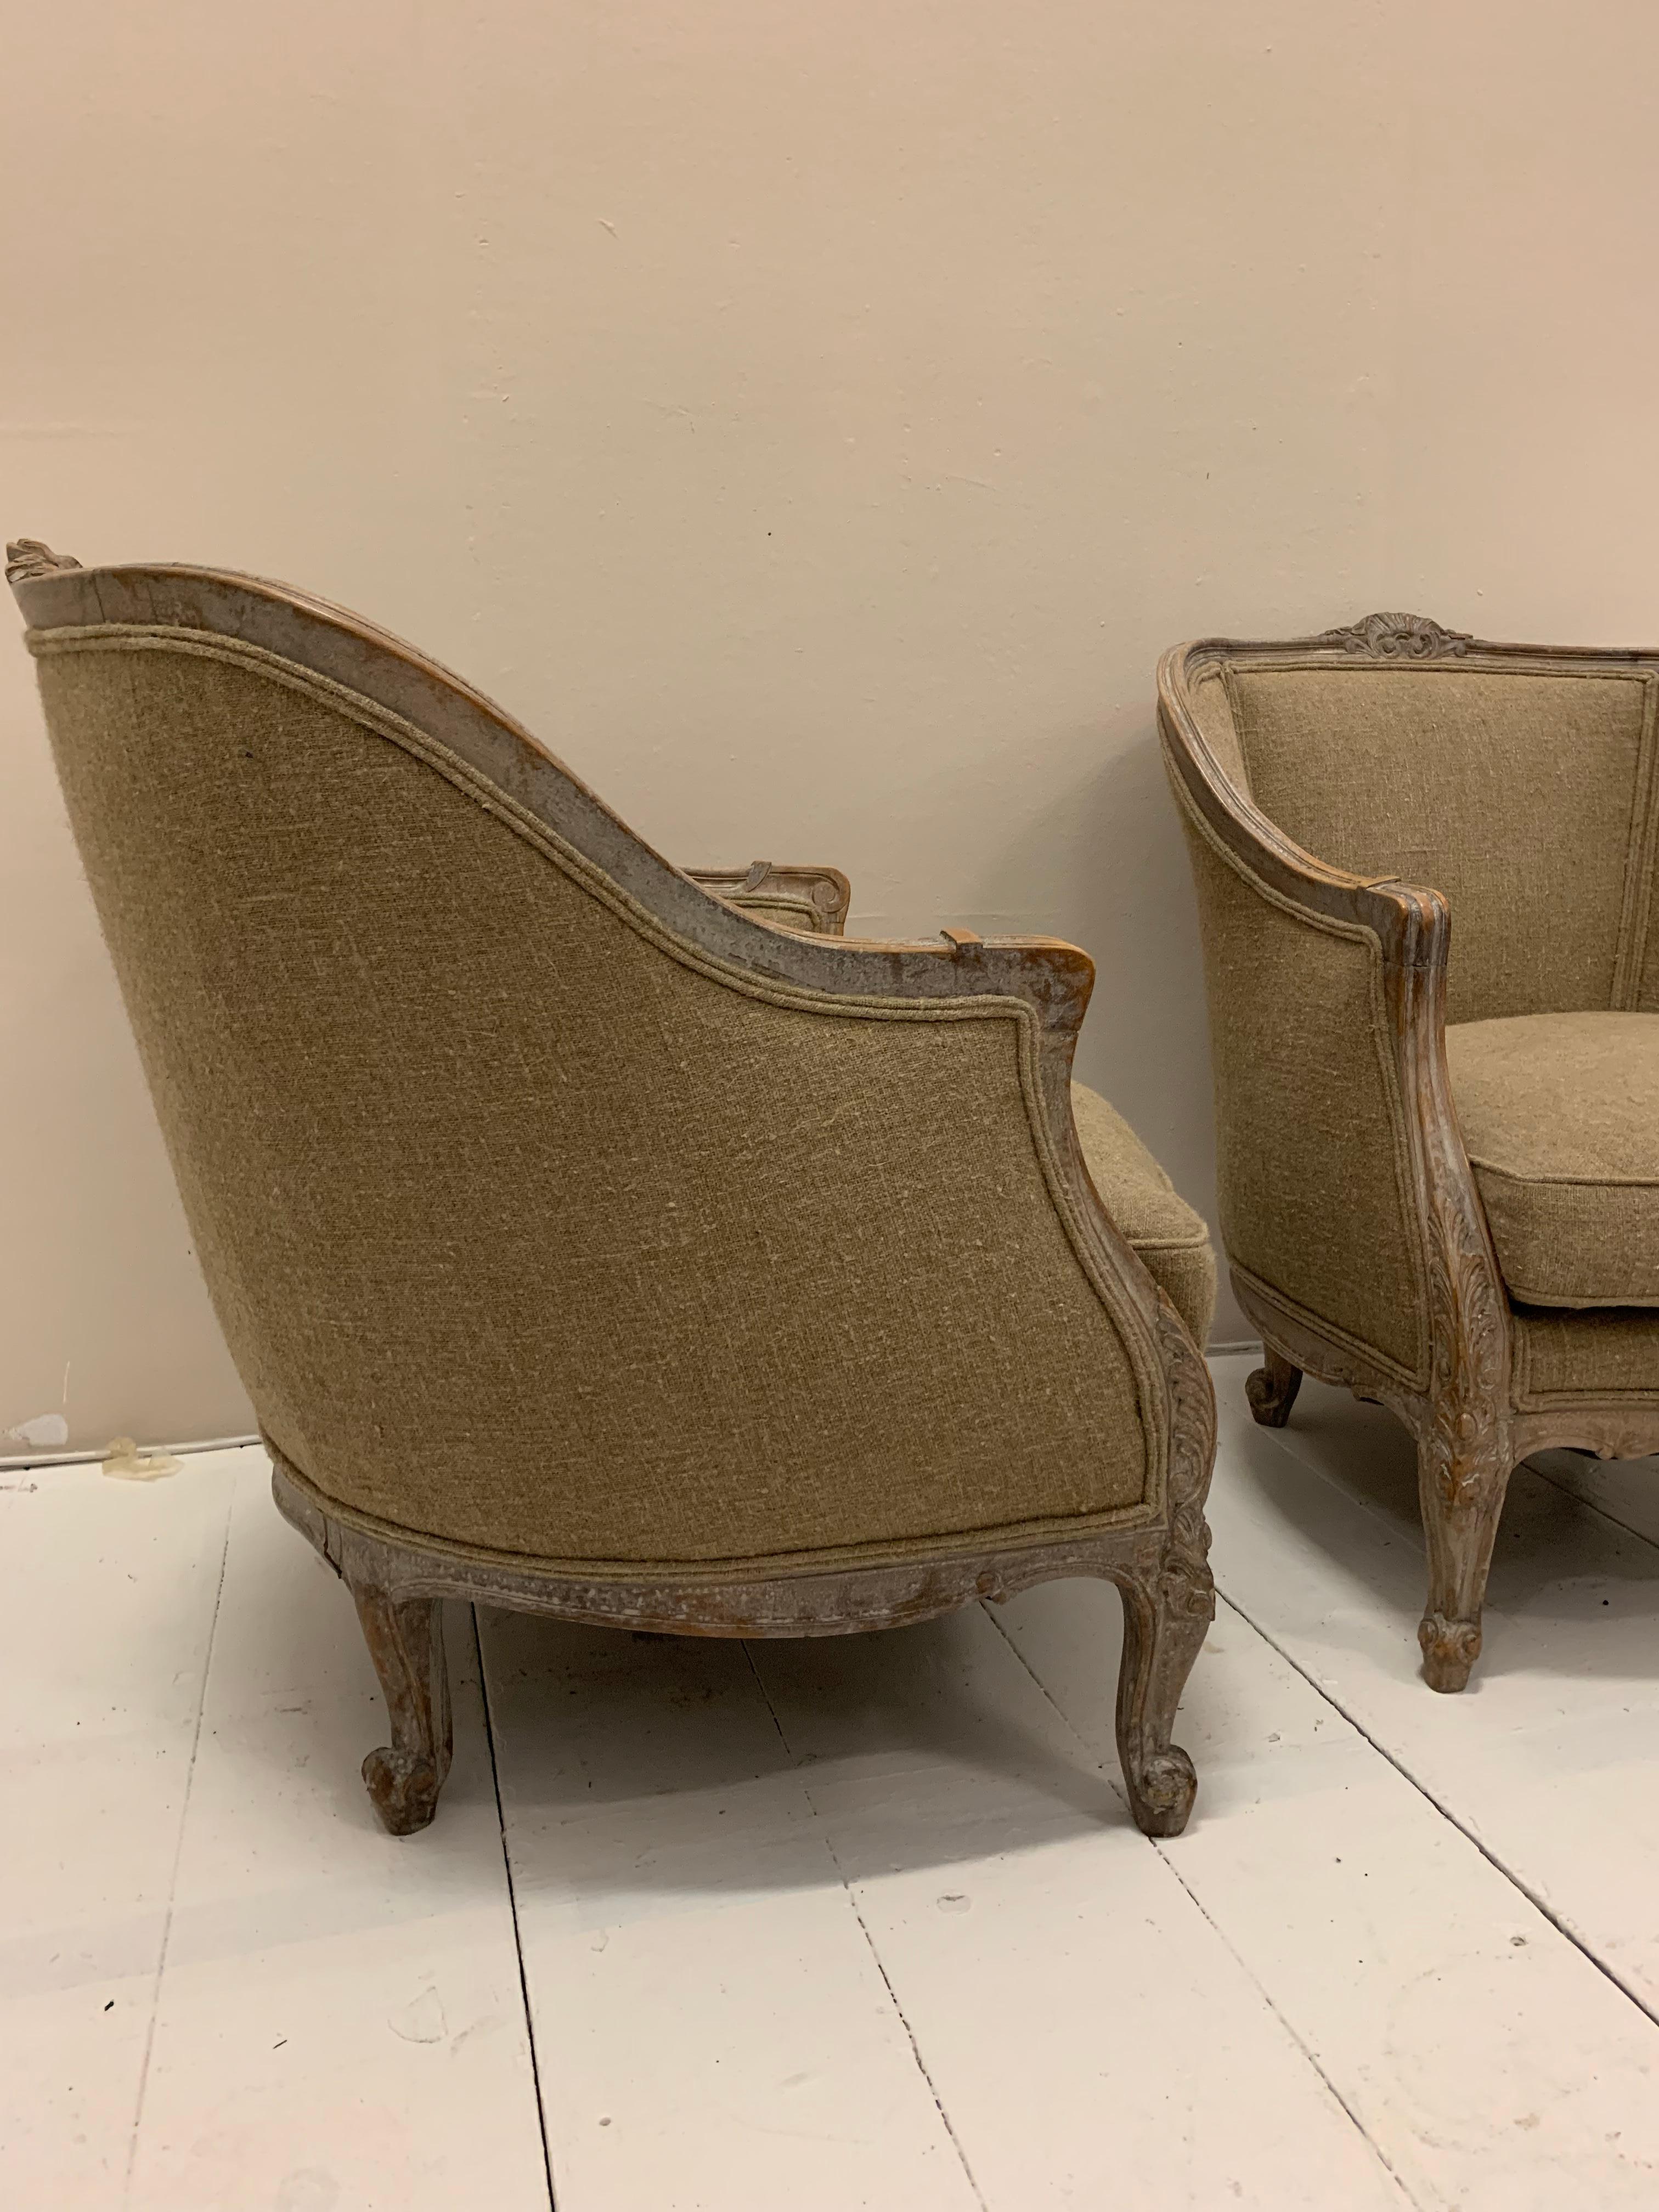 French Provincial Pair of 1920s Swedish Fauteuils Armchairs Upholstered in Mid-Taupe Linen Fabric For Sale